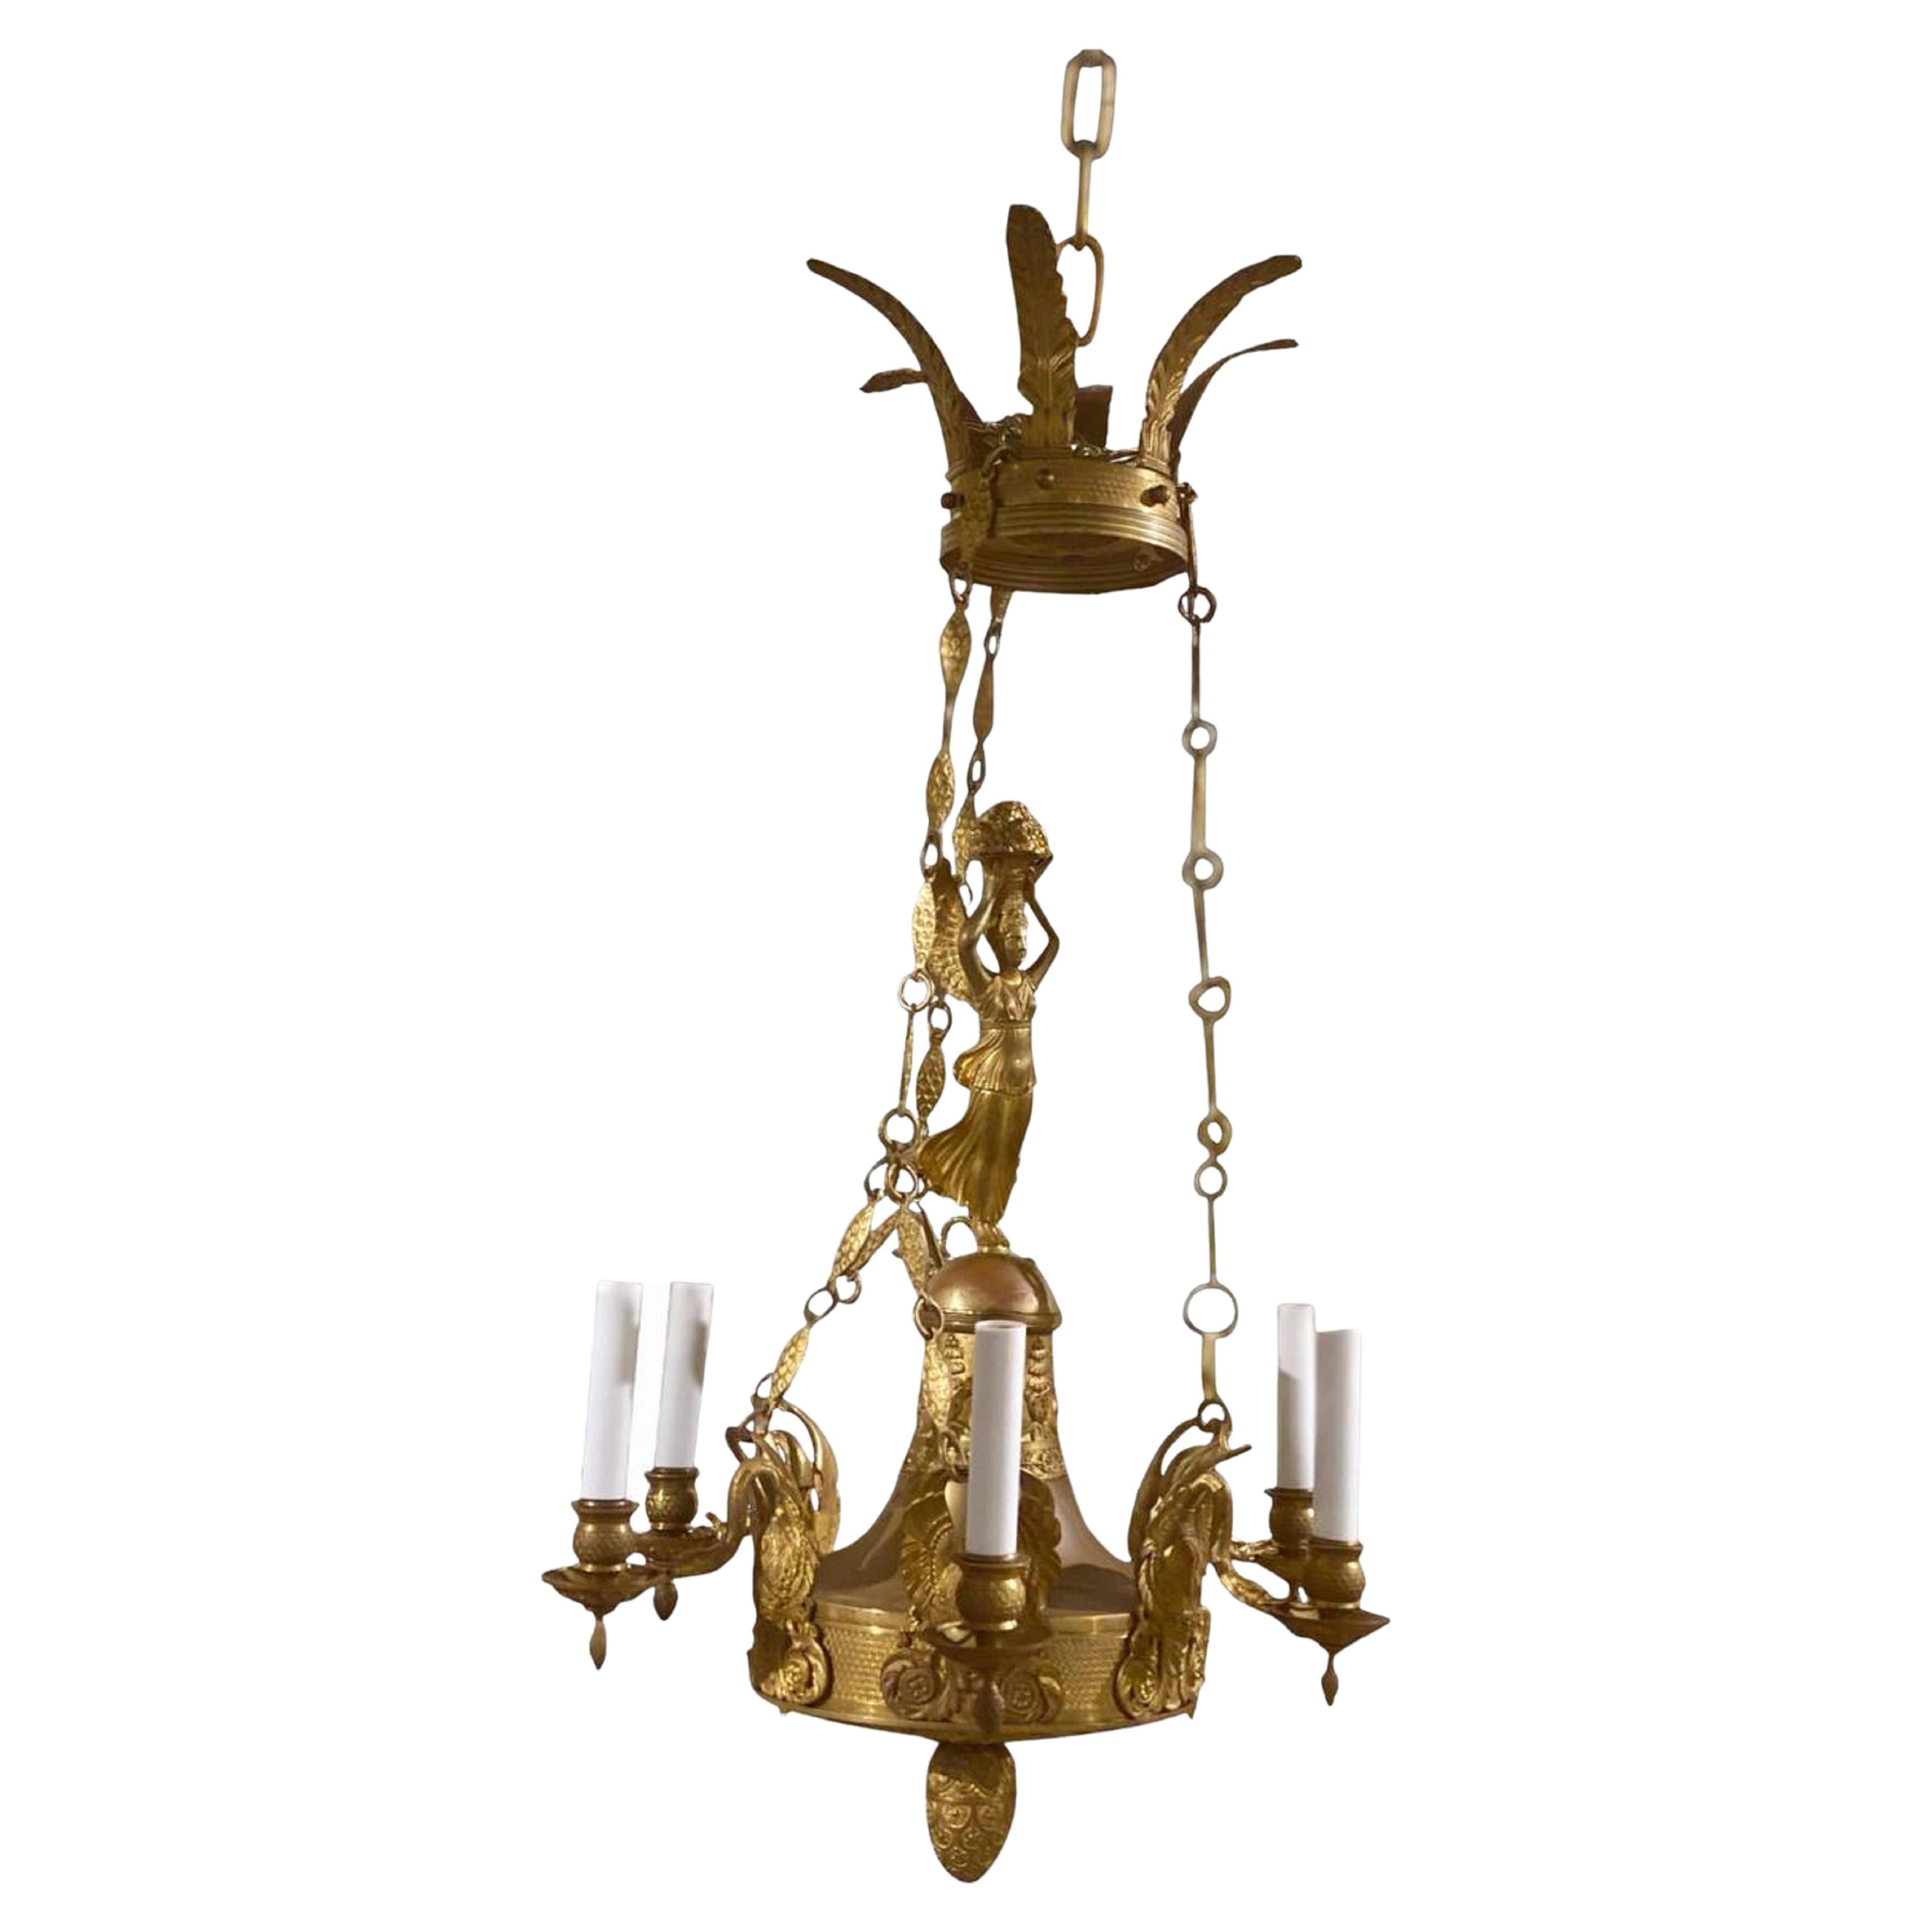 Late 19th Century French Empire Chandelier